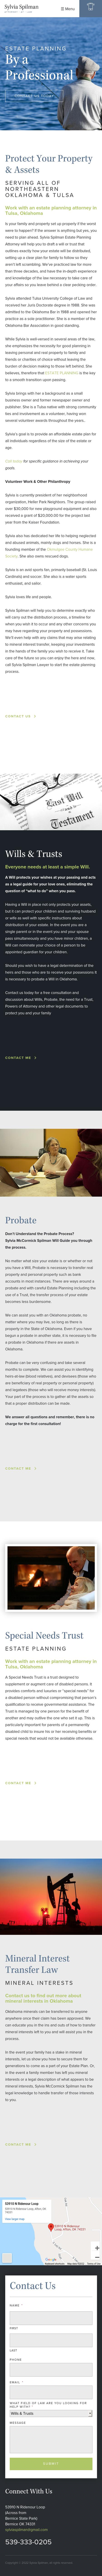 Sylvia McCormick Spilman, Attorney & Counselor at Law - Tulsa OK Lawyers